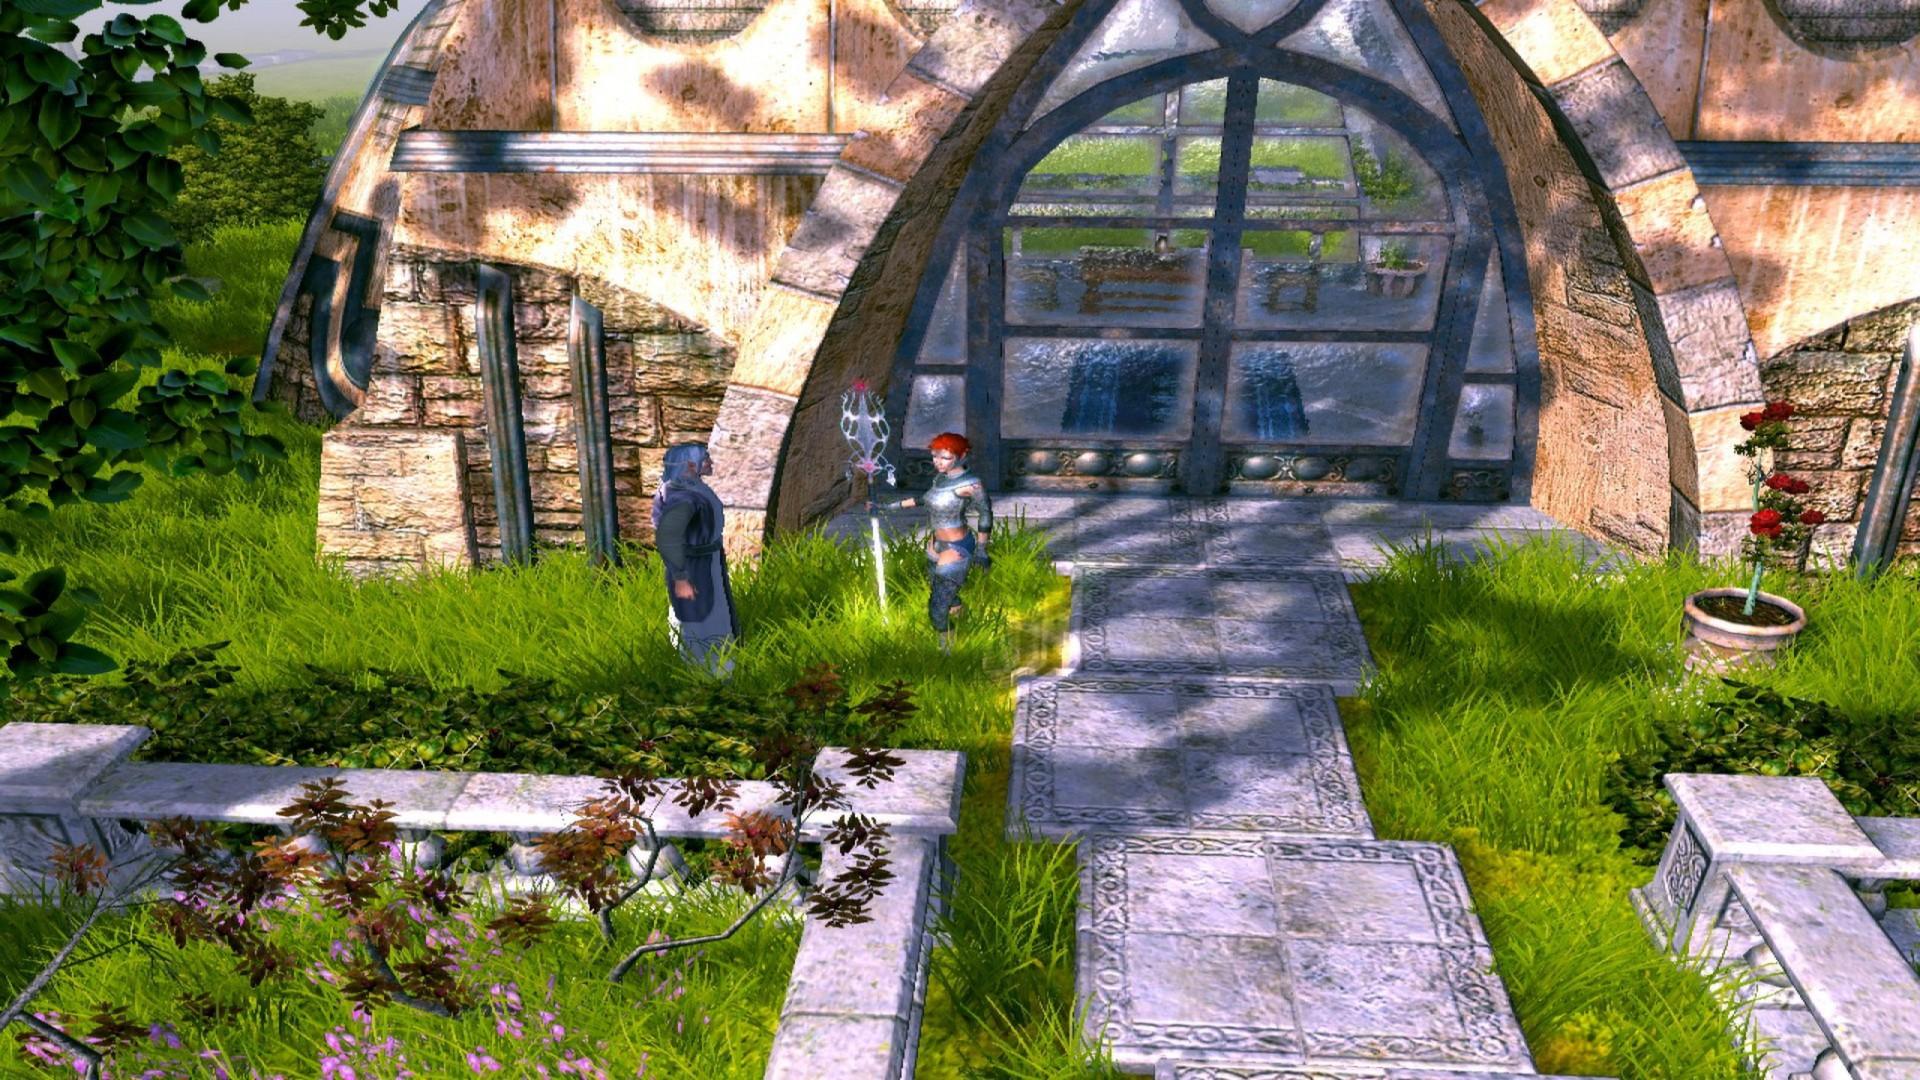 Screenshot №6 from game Sacred 2 Gold